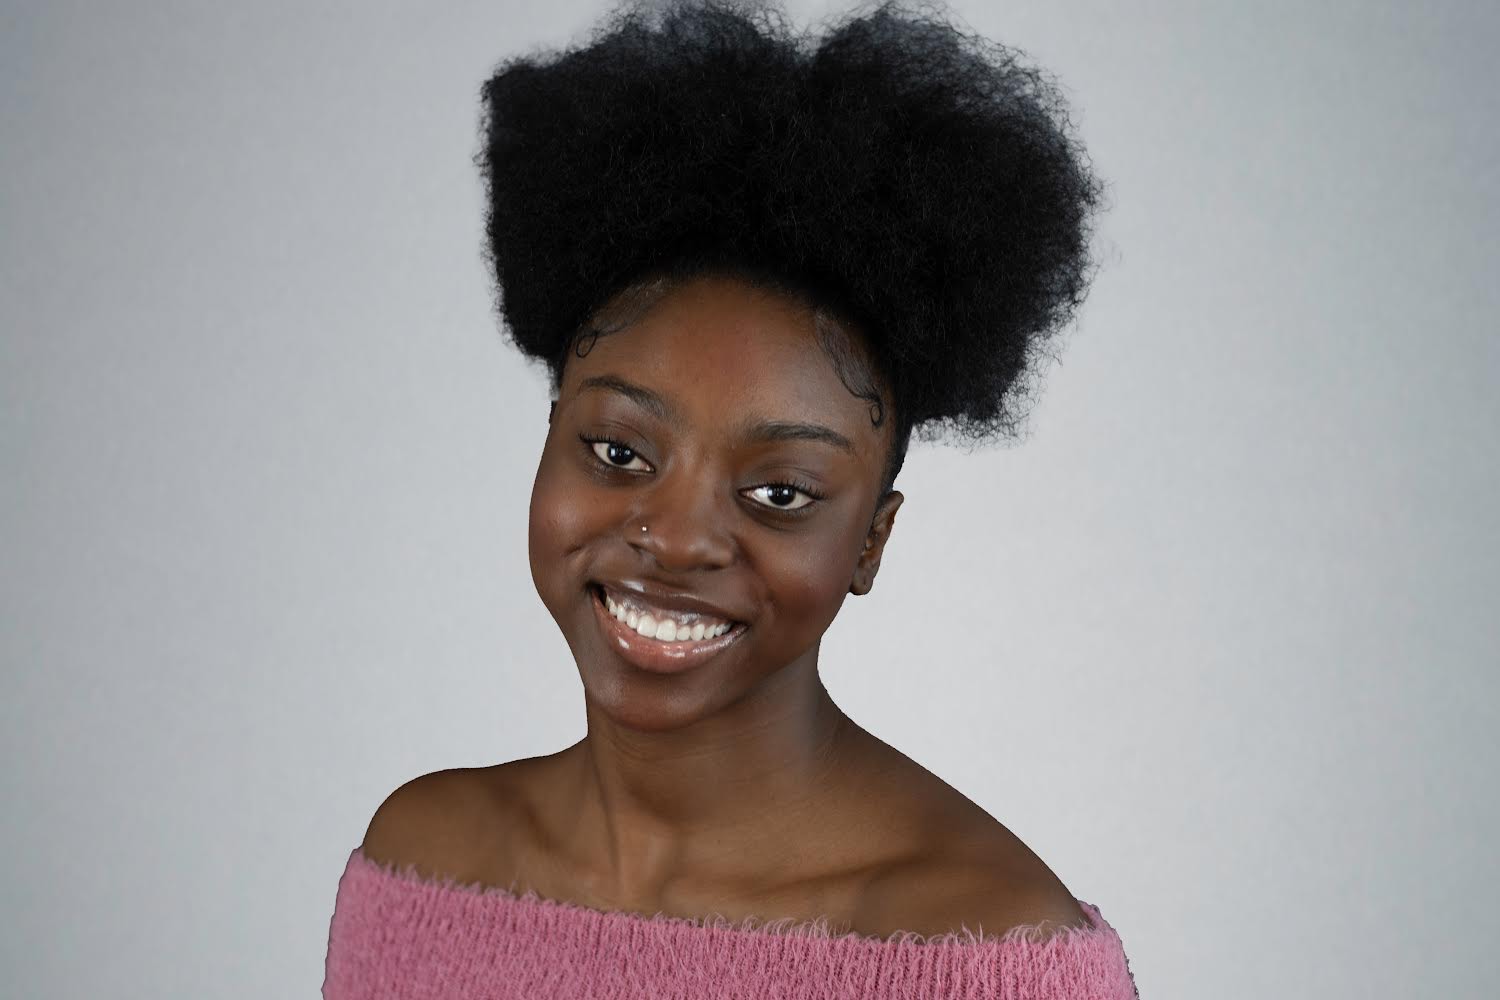 Headshot of Kenyla Jackson, a smiling young black woman with her dark hair pulled high on top of her head. She has a small nose piercing stud and is wearing an off-shoulder pink sweater